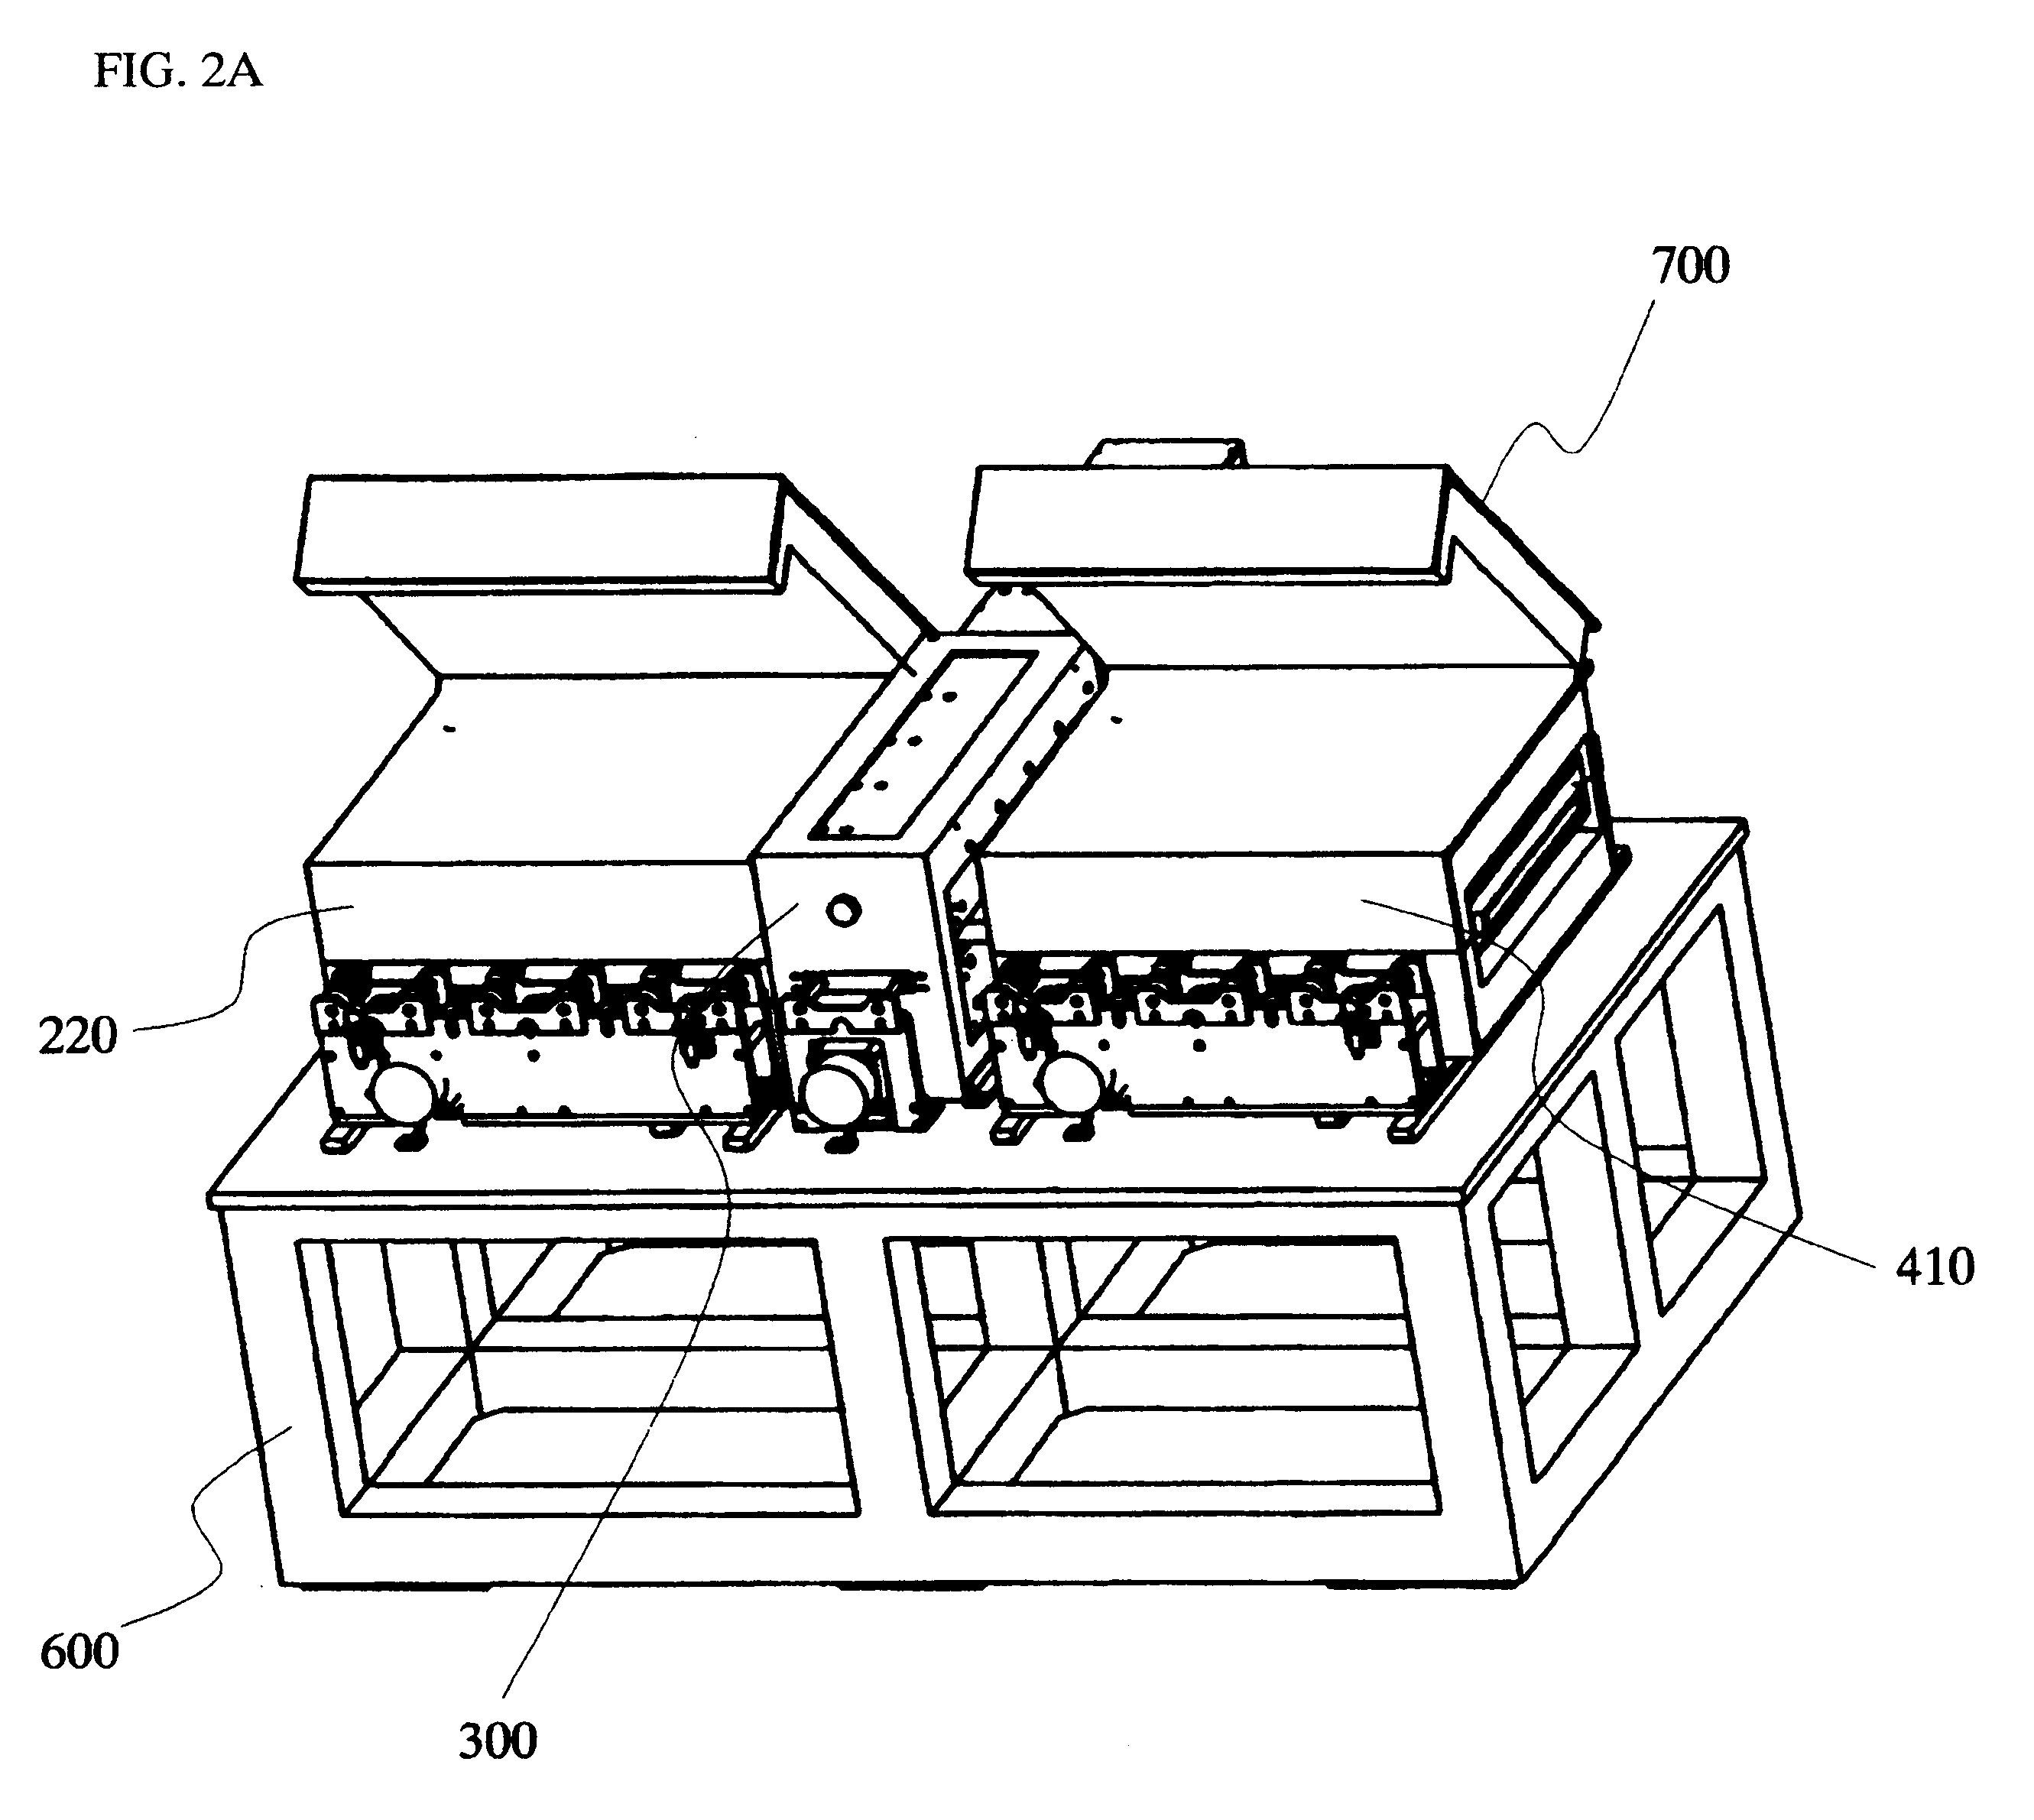 Apparatuses for heat-treatment of semiconductor films under low temperature